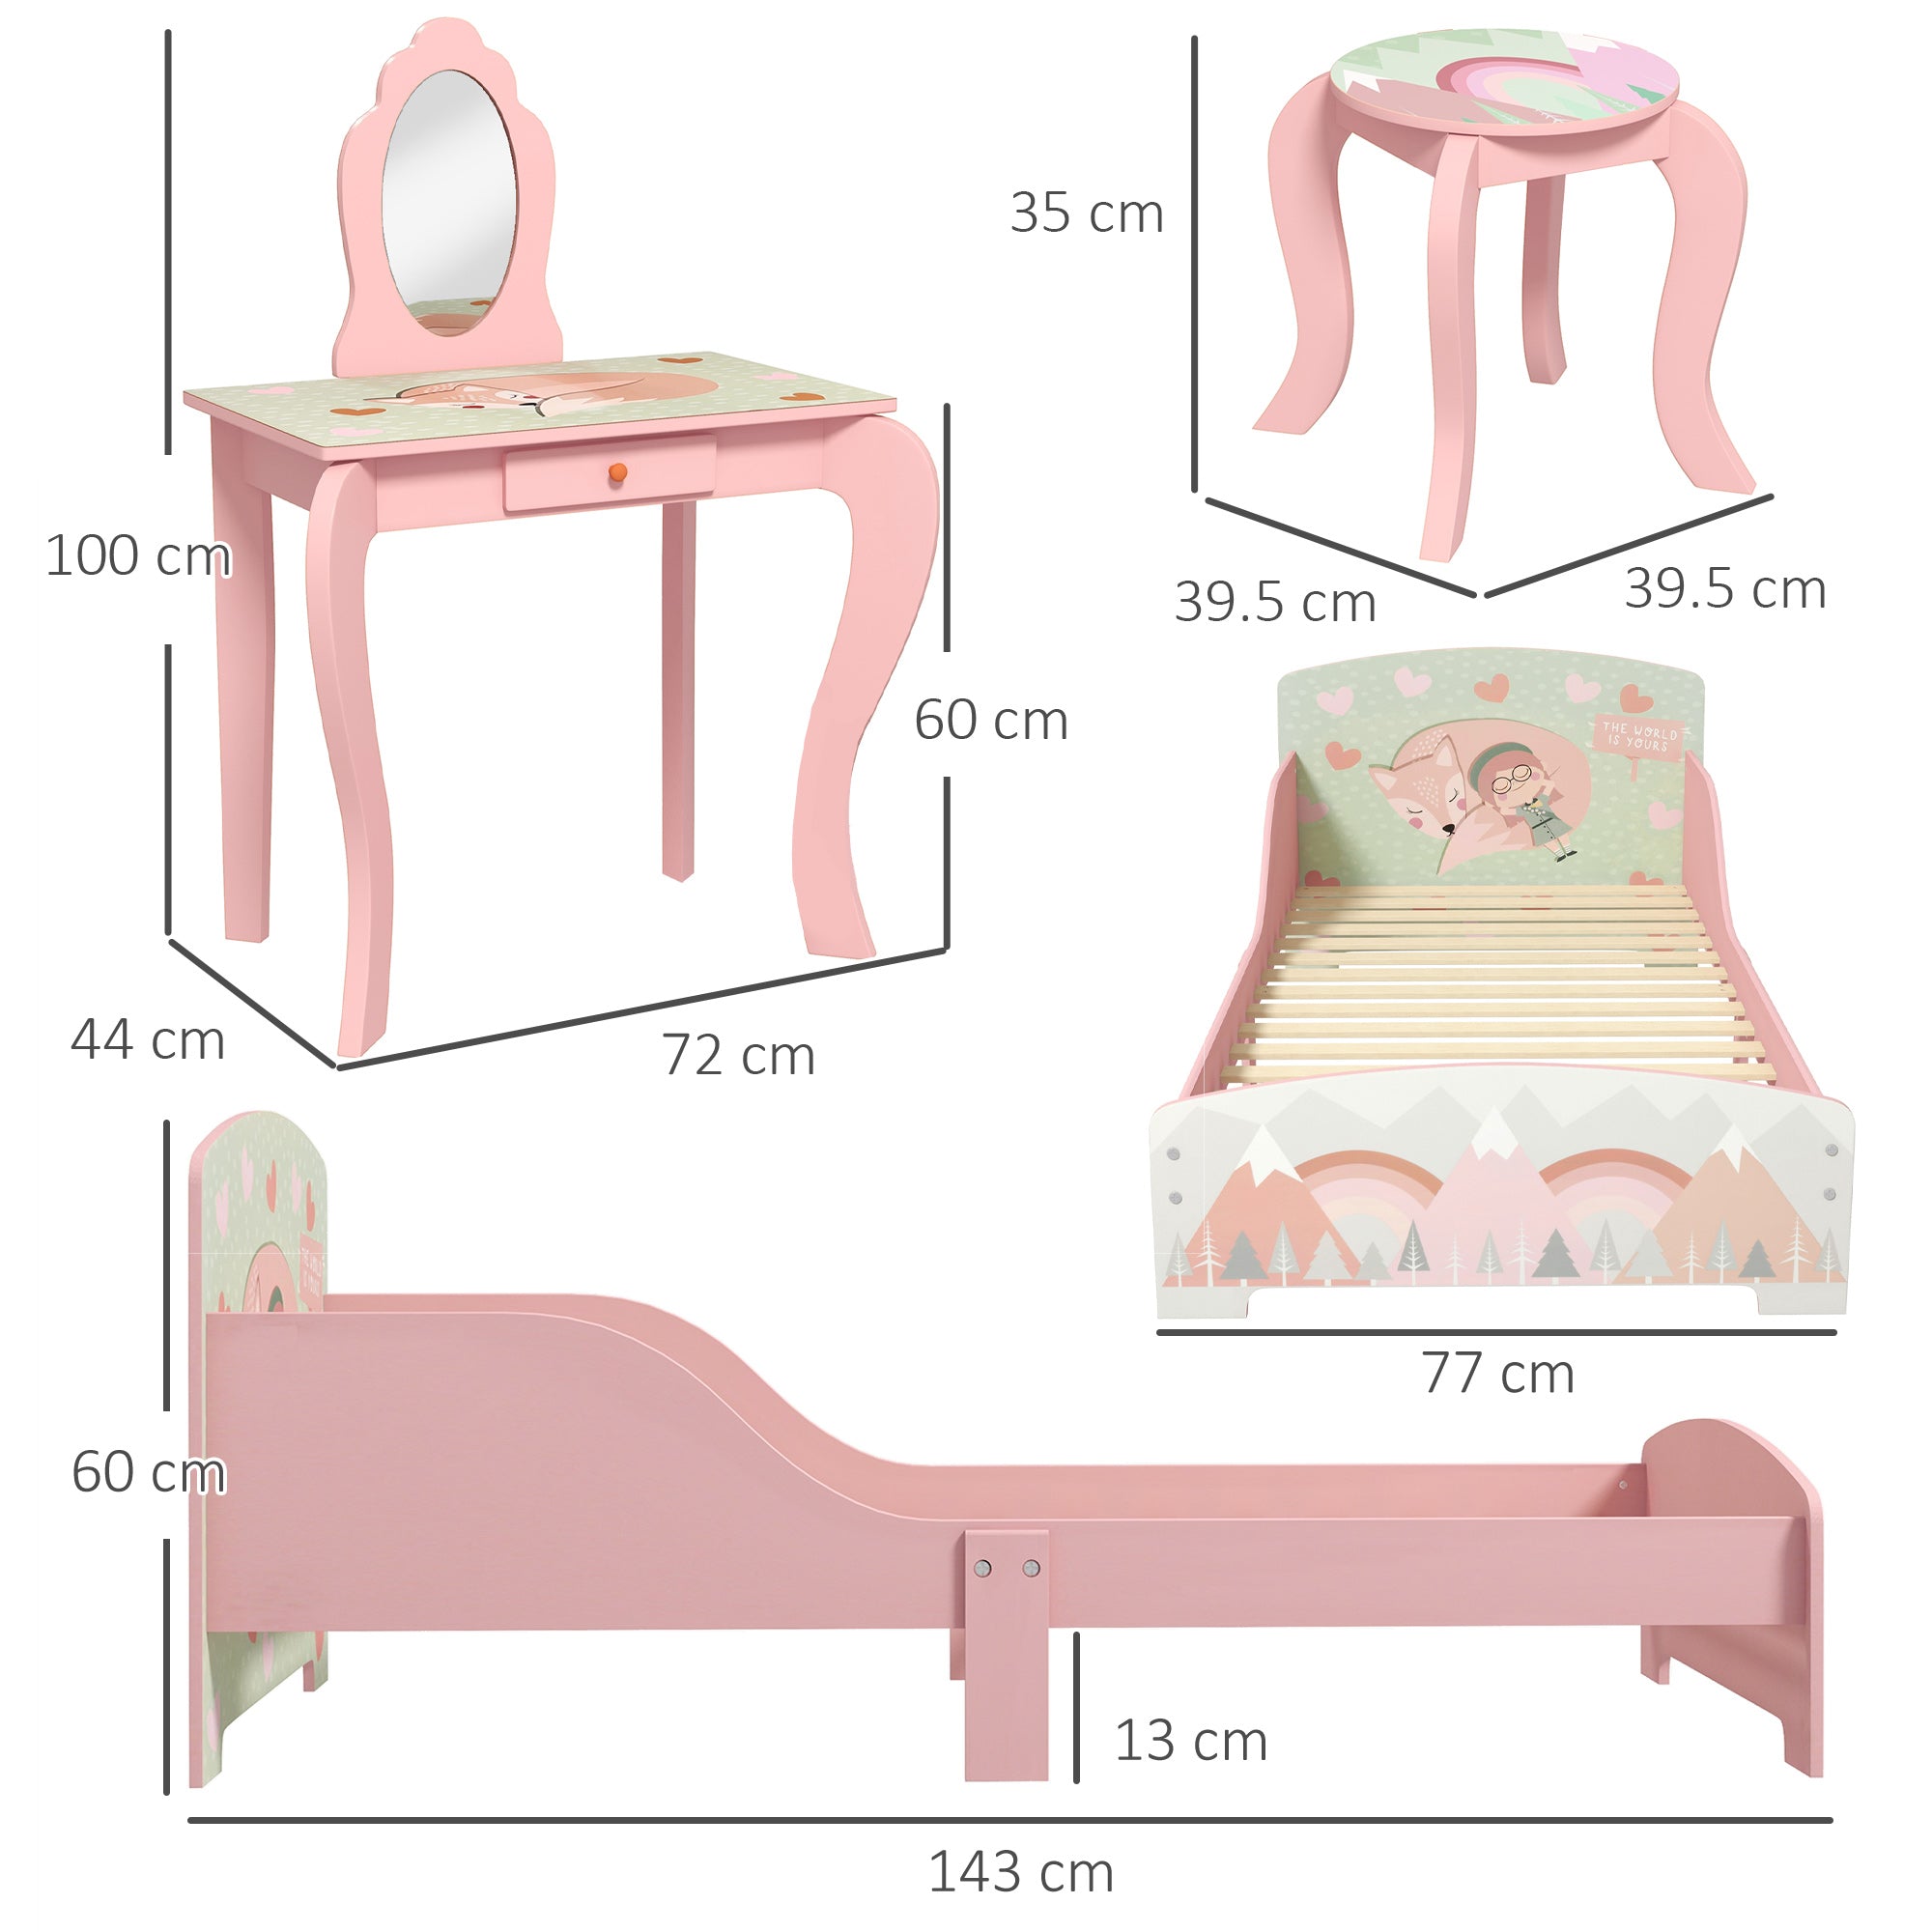 Toddler Bed Frame, Kids Dressing Table with Mirror and Stool, Cute Animal Design Kids Bedroom Furniture Set for Ages 3-6 Years, Pink-2